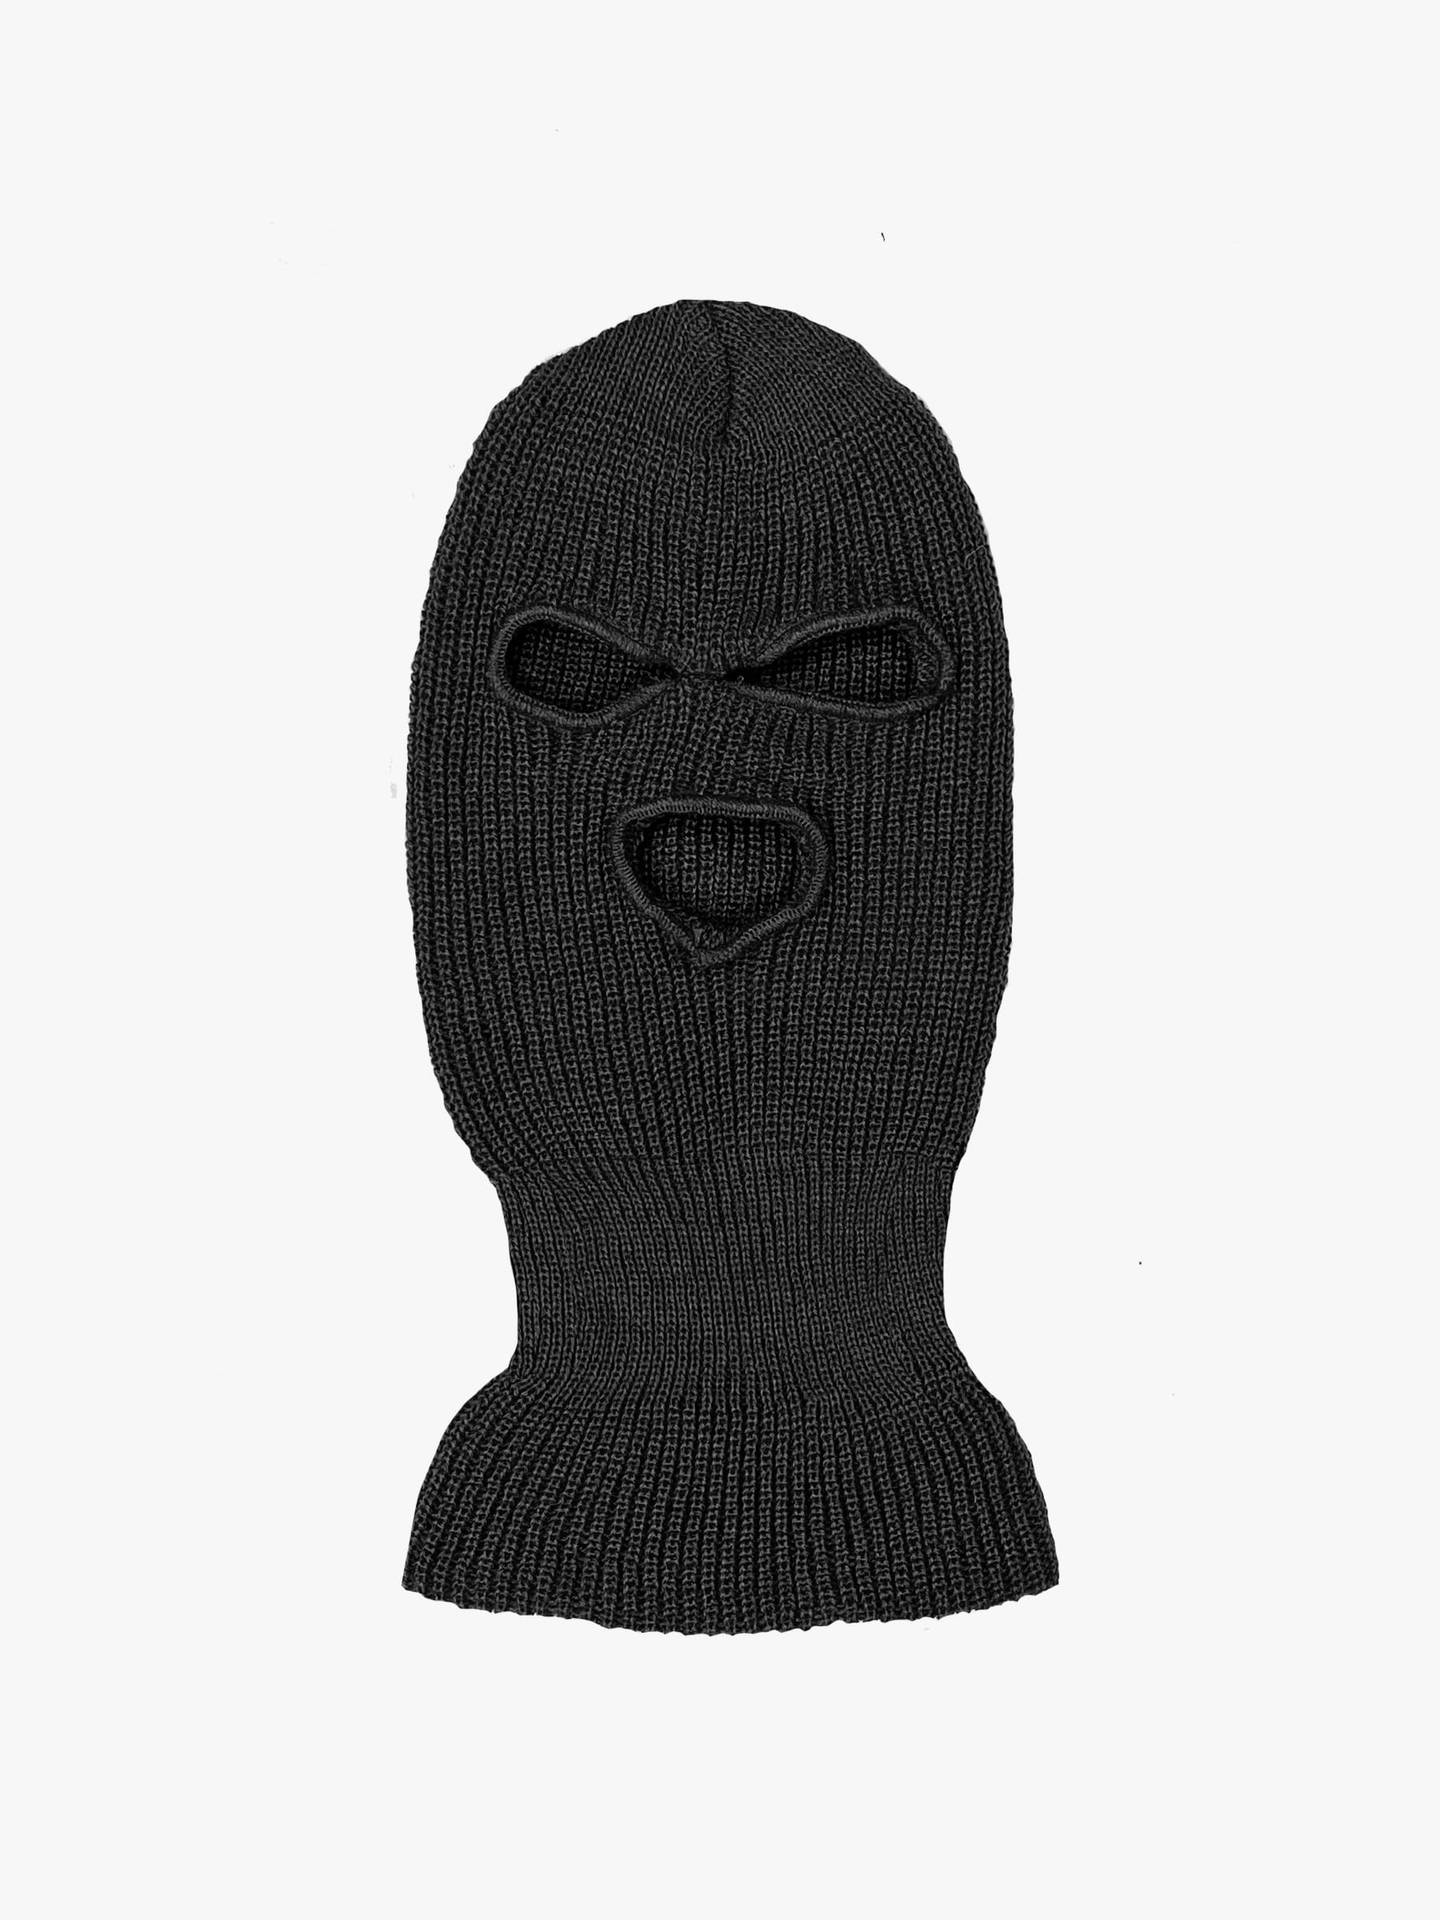 A Black Knitted Mask With A Face On It Wallpaper